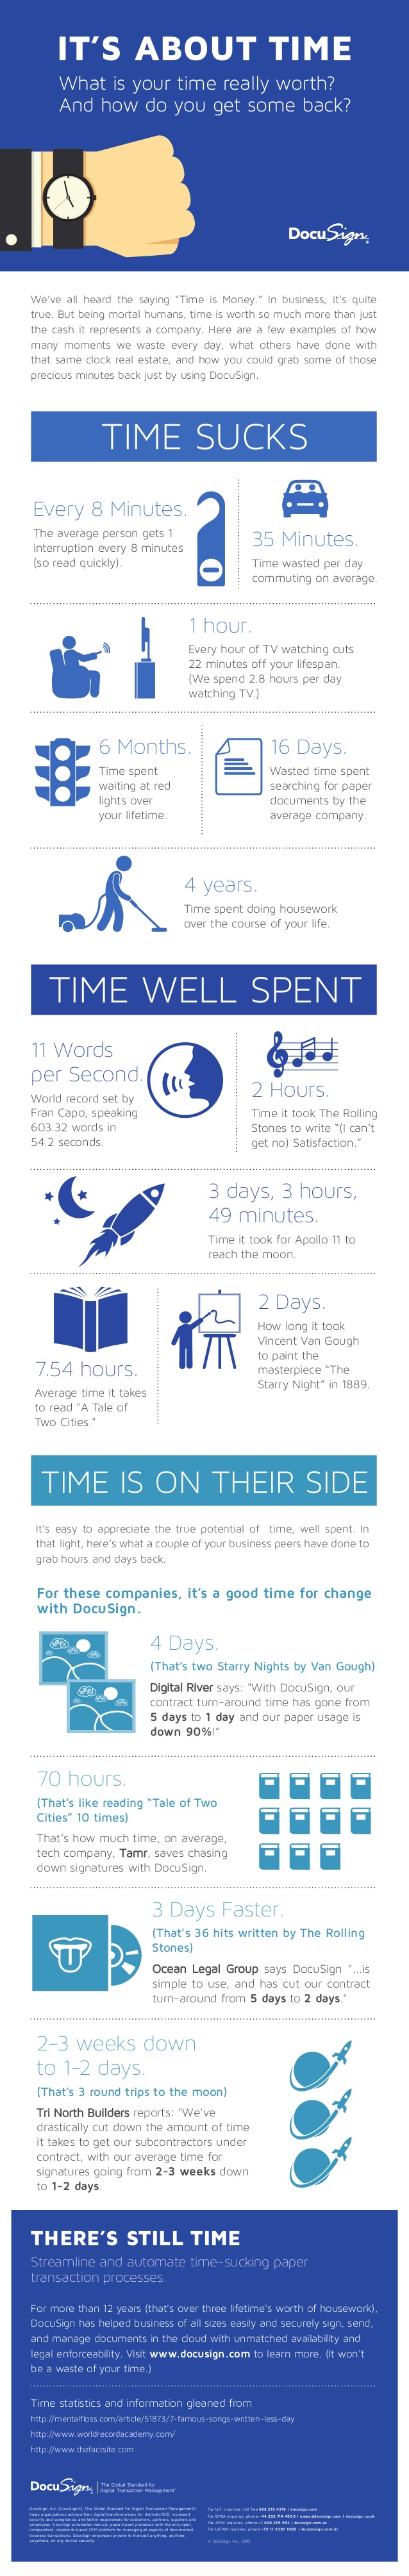 docusign infograhic its about time